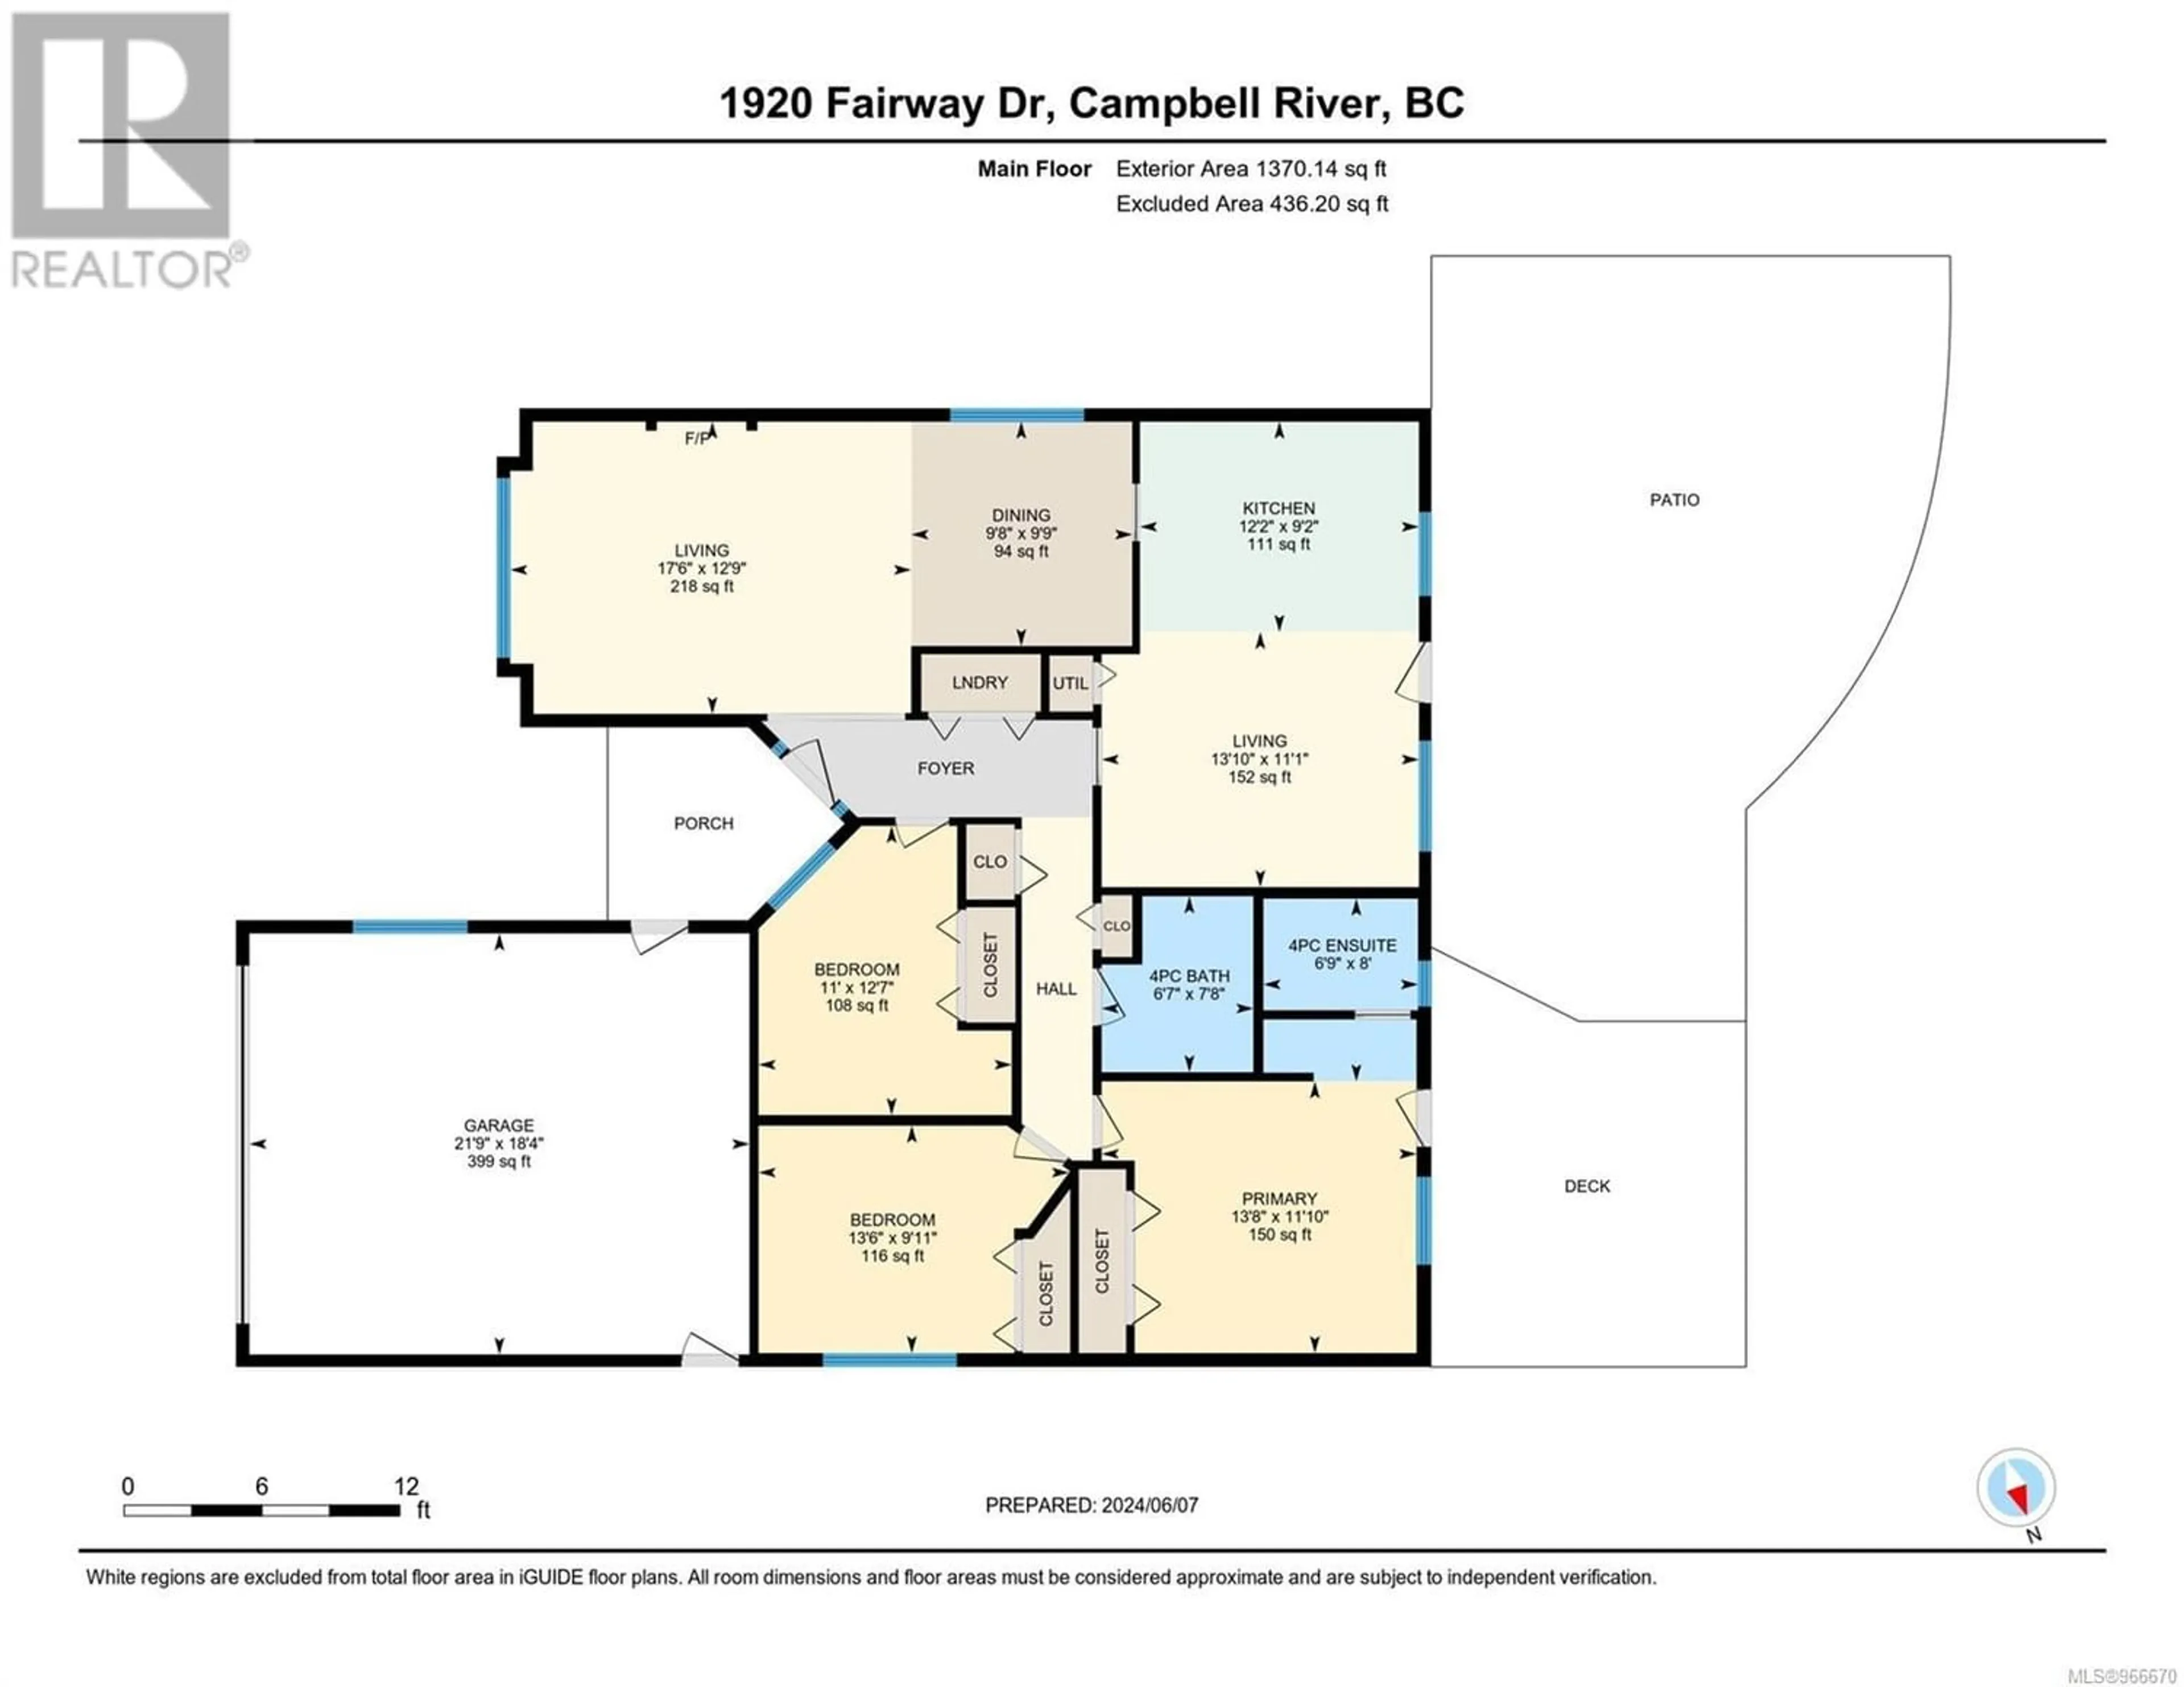 Floor plan for 1920 Fairway Dr, Campbell River British Columbia V9H1R4